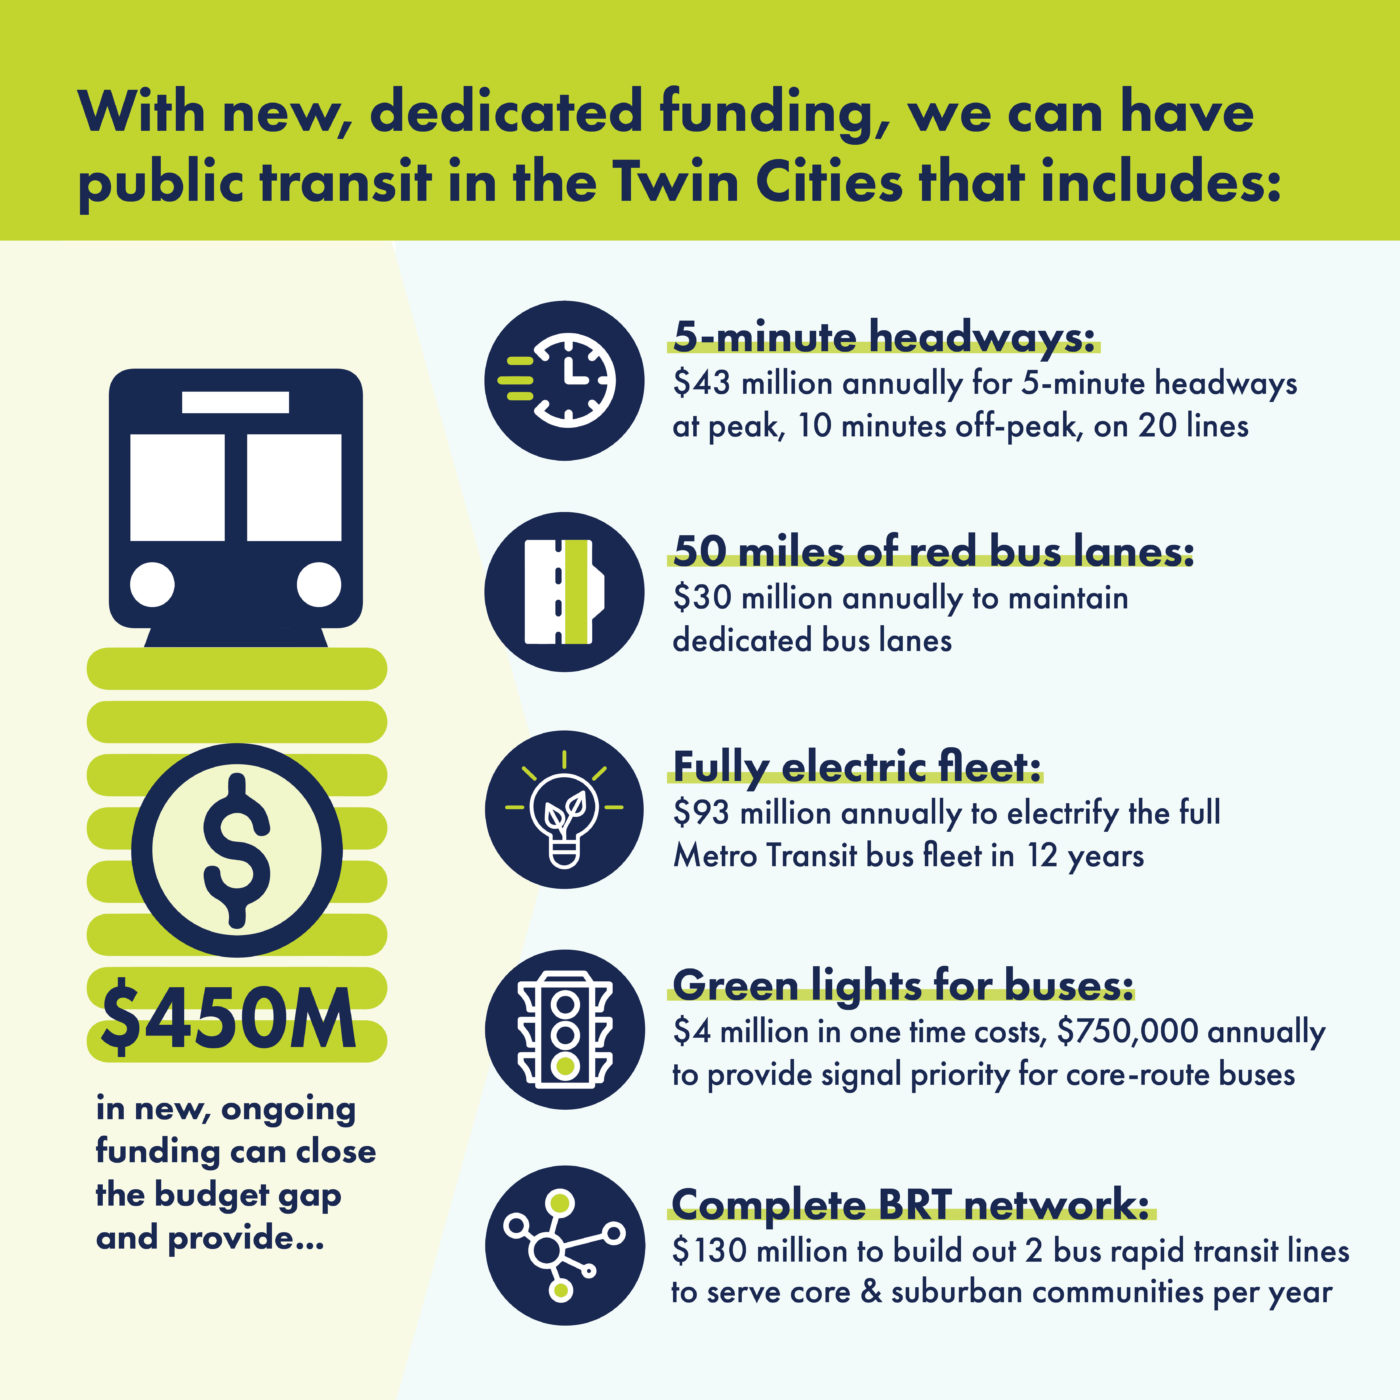 A graphic showing a vision for what $450 million could deliver for our public transit system, including $43 million annually for 5-minute headways on 20 bus lines; $30 million annually to maintain 50 miles of red bus lanes; $93 million annually to electrify the full Metro Transit fleet in 12 years; $4 million in one-time costs and $750,000 annually to provide signal priority on core-route buses; and $130 million annually to build out two bus rapid transit routes  